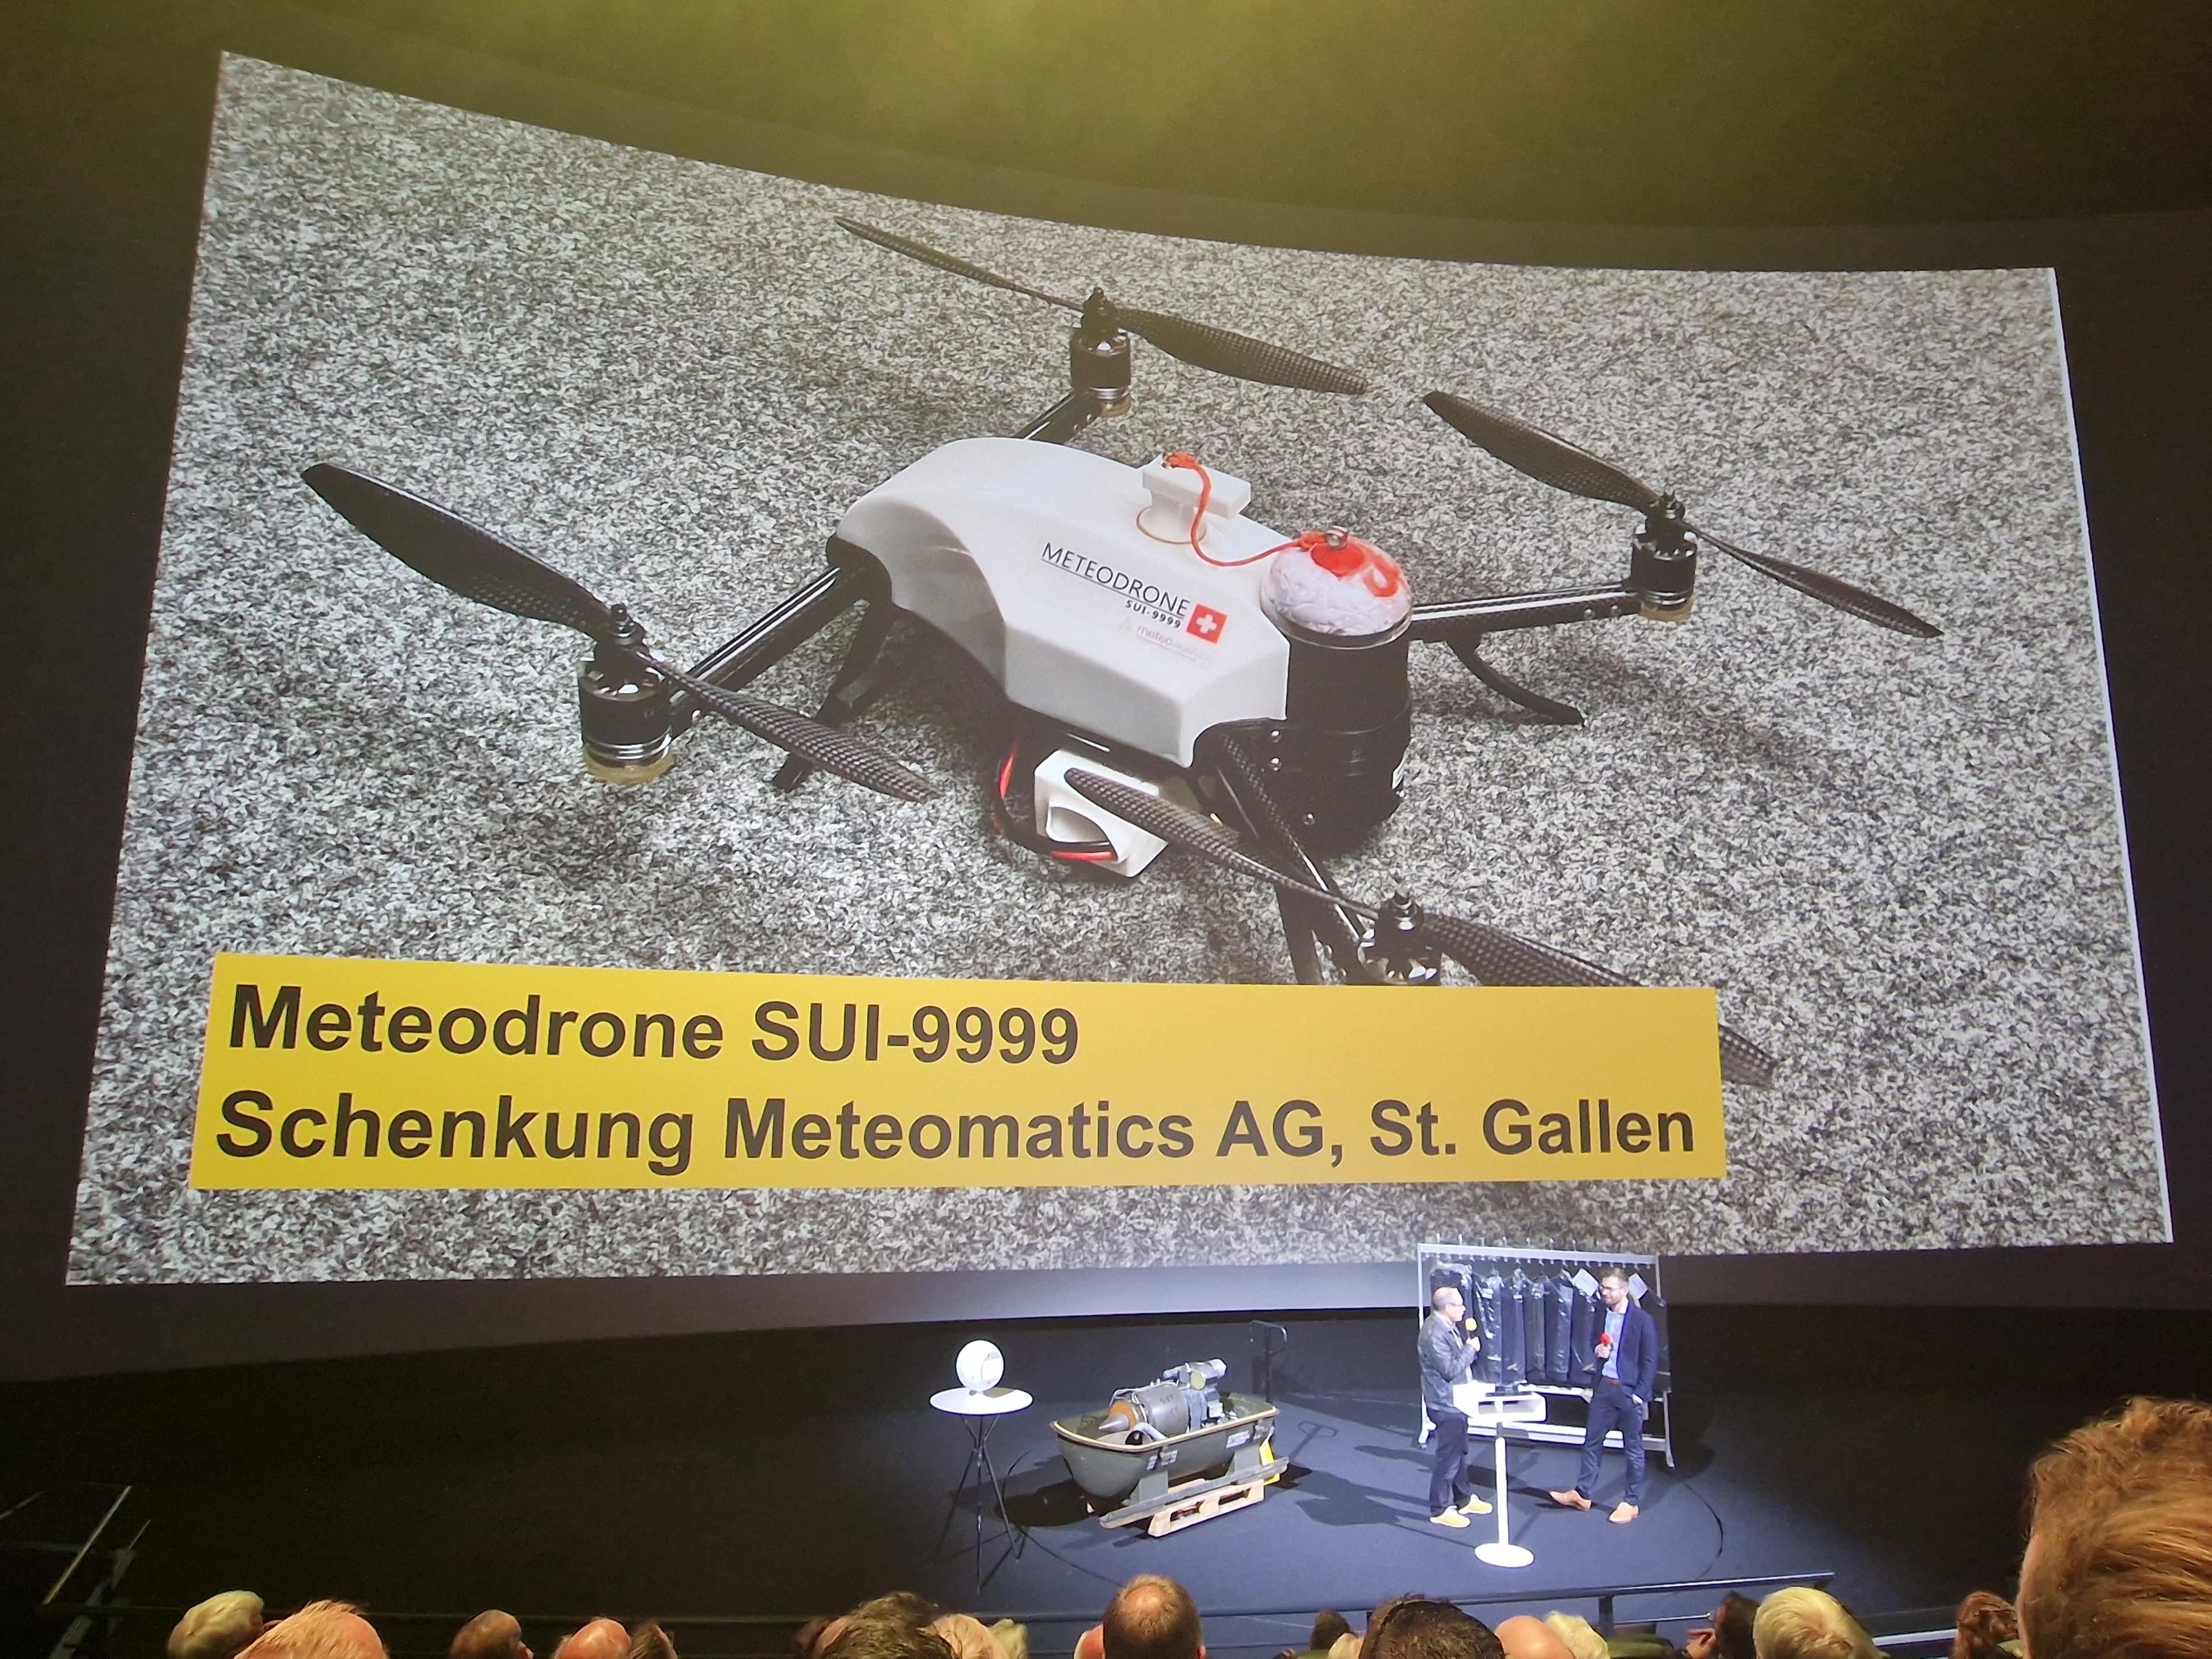 meteodrone at the swiss museum of transport